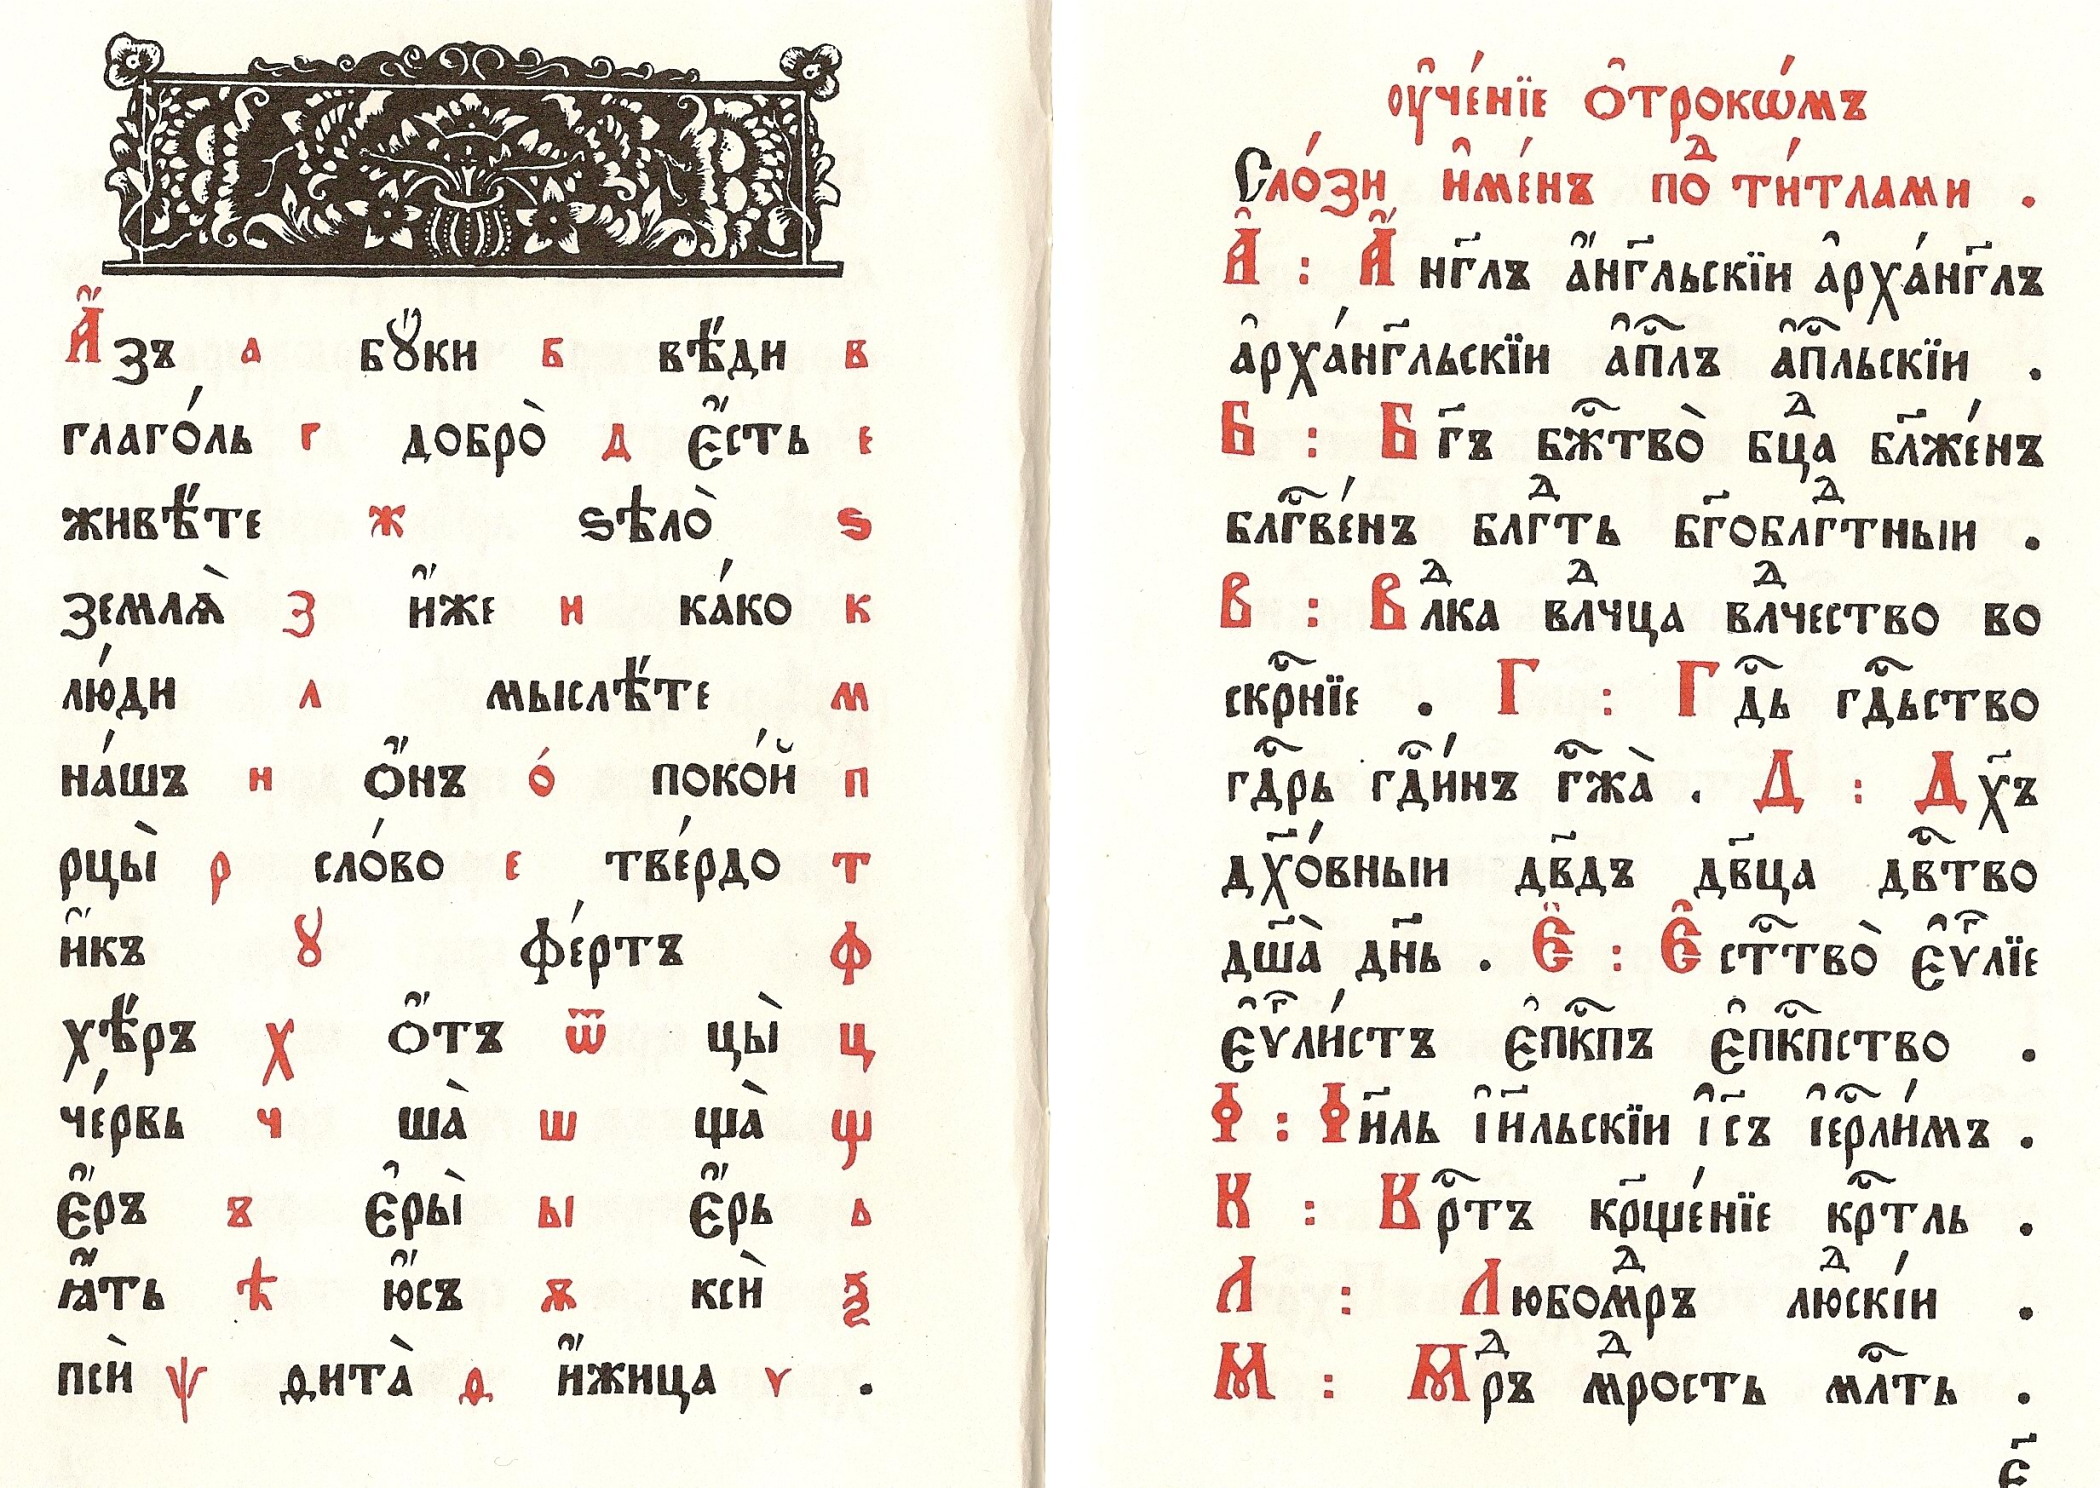 Slavonic With Old Russian 32